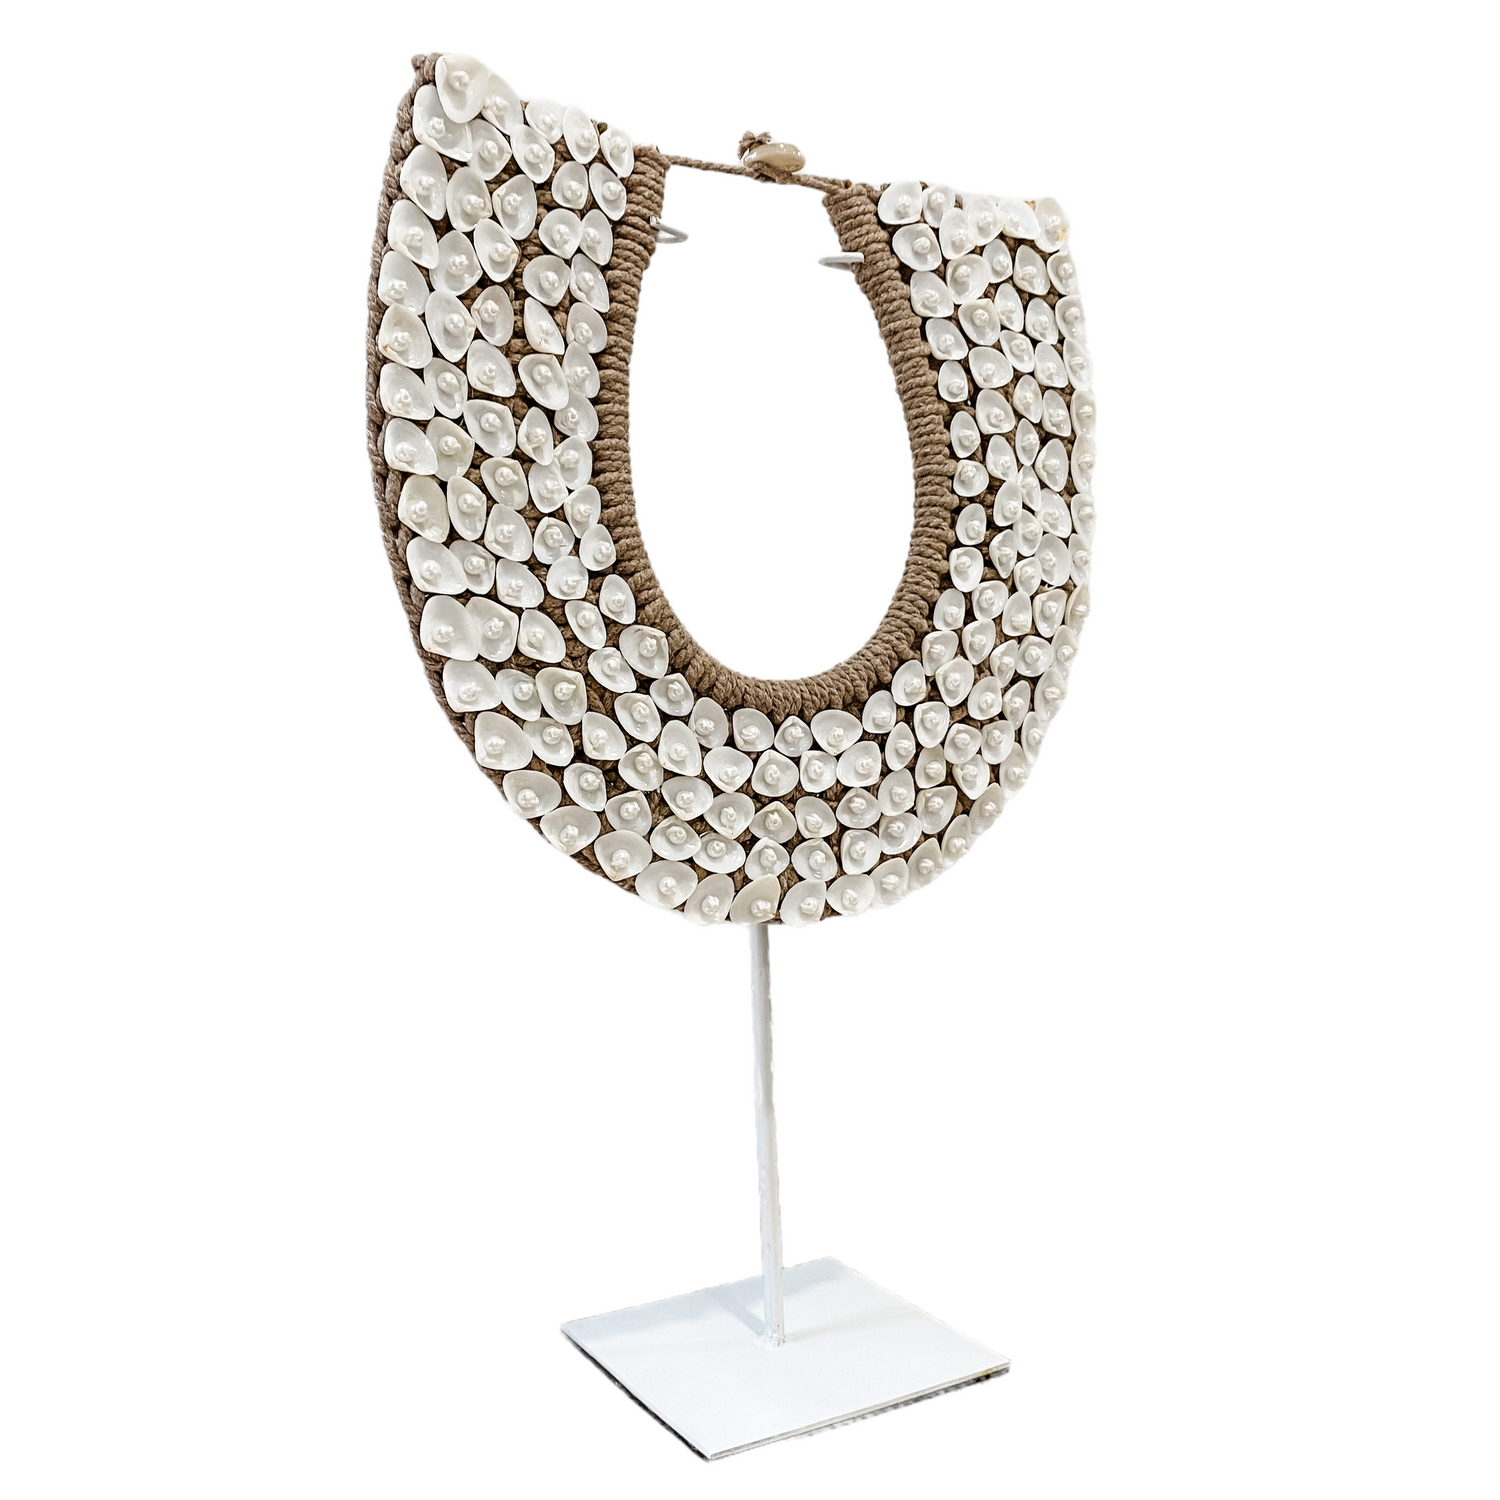 White Oliana Shell Necklace on Stand